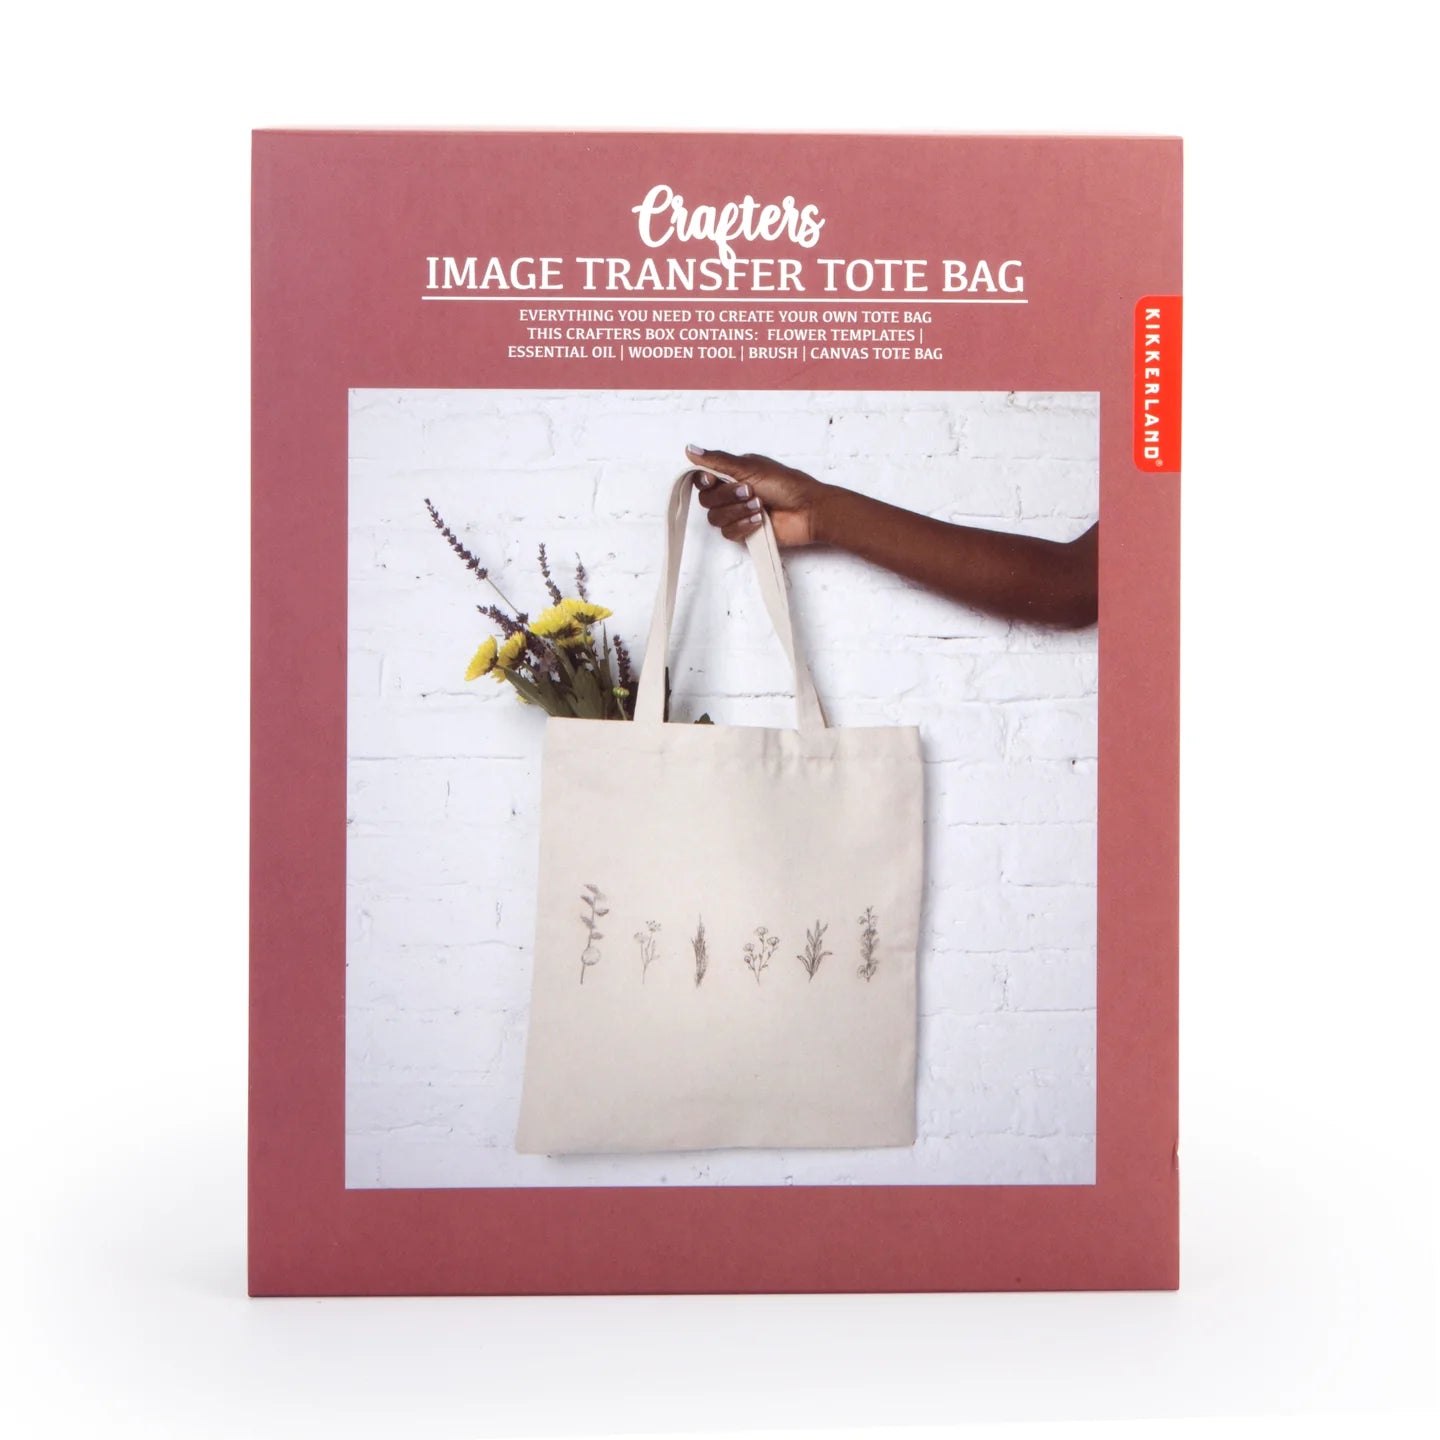 Fab Gifts | Kikkerland Crafters Image Transfer Tote Bag by Weirs of Baggot Street